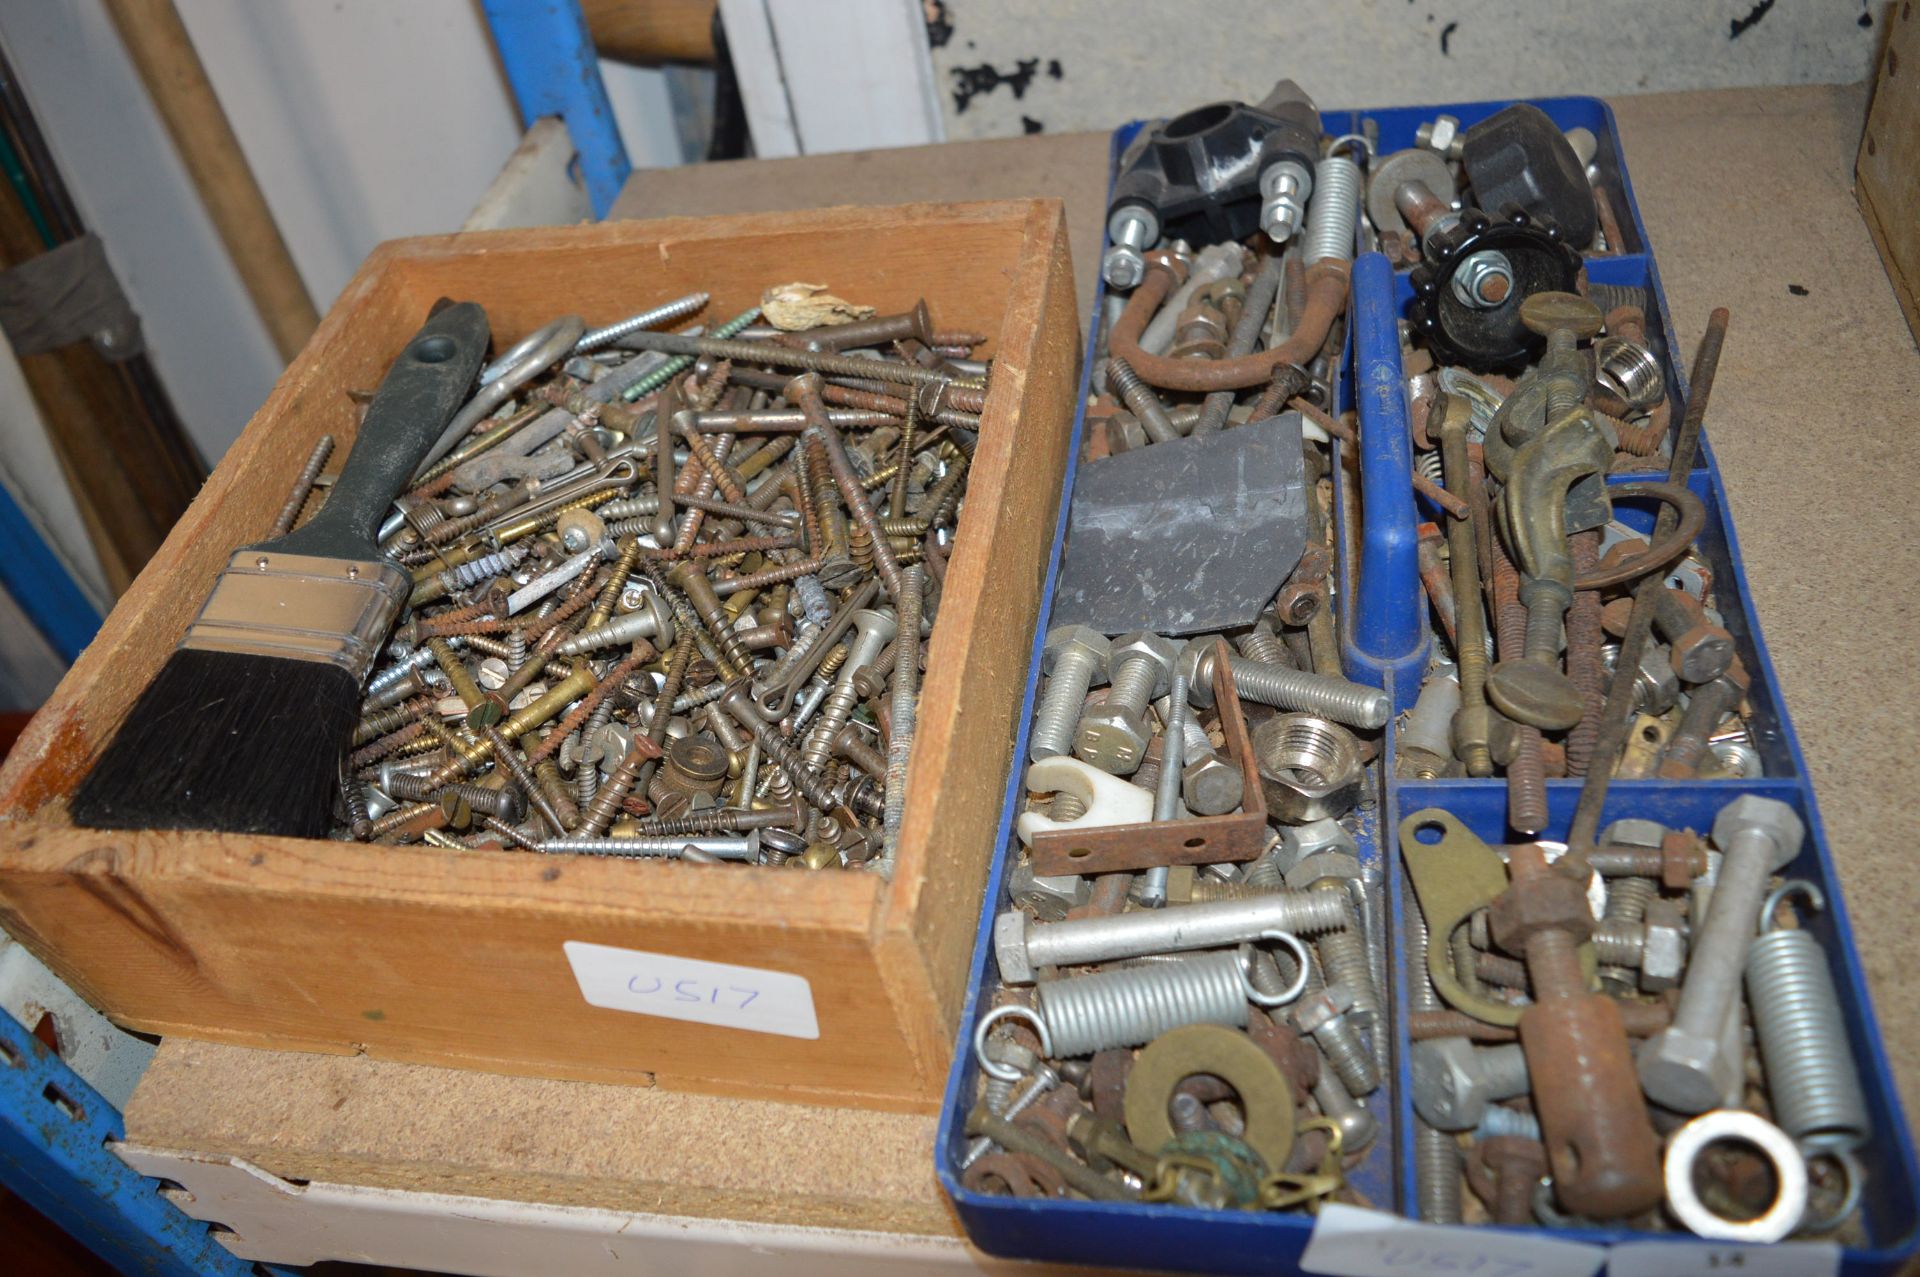 *Tray of Assorted Screws, Bolts, Clamps, etc.